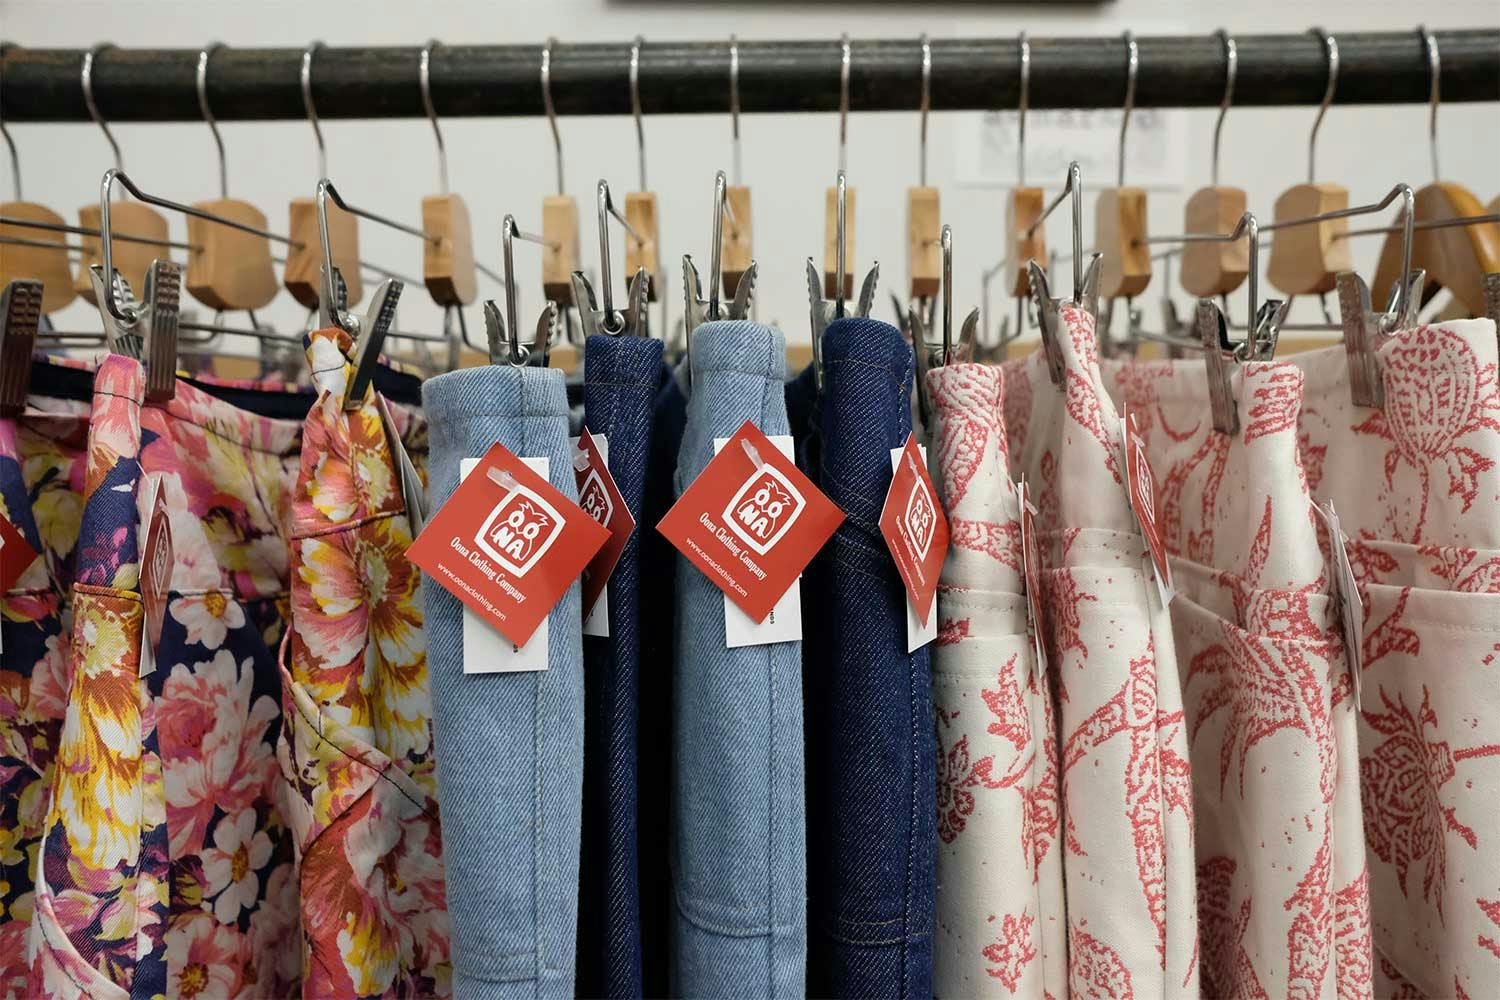 A row floral print and denim pants hanging from hangers. A red label with the Oona Clothing logo appears on each pair.